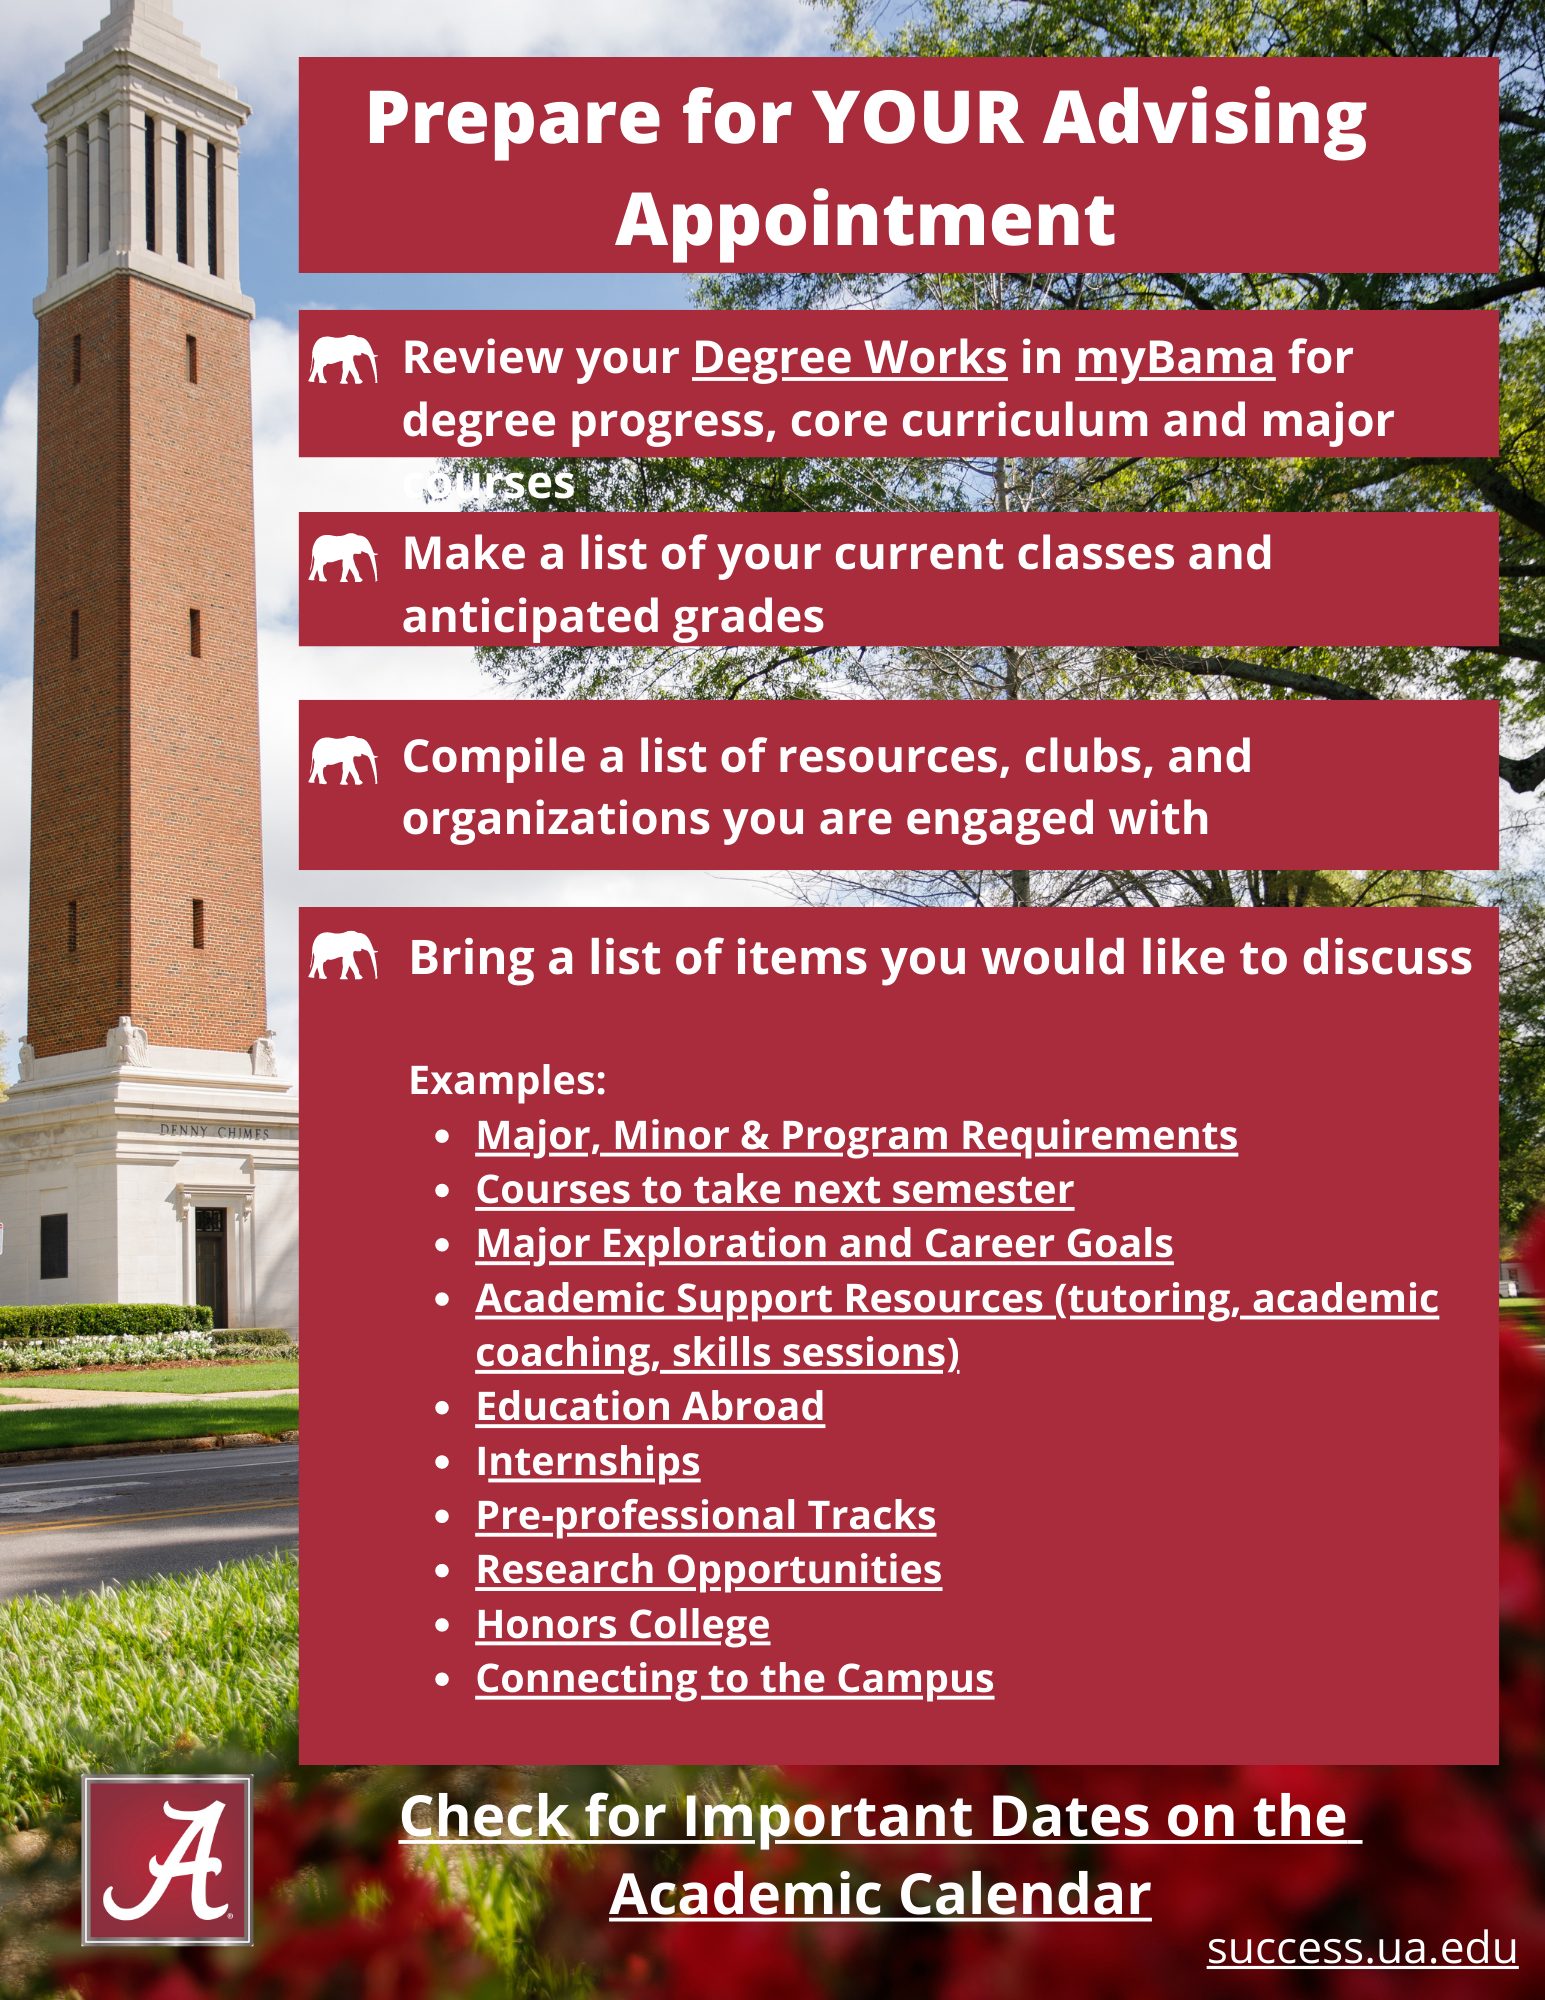 Prepare for YOUR Advising Appointment